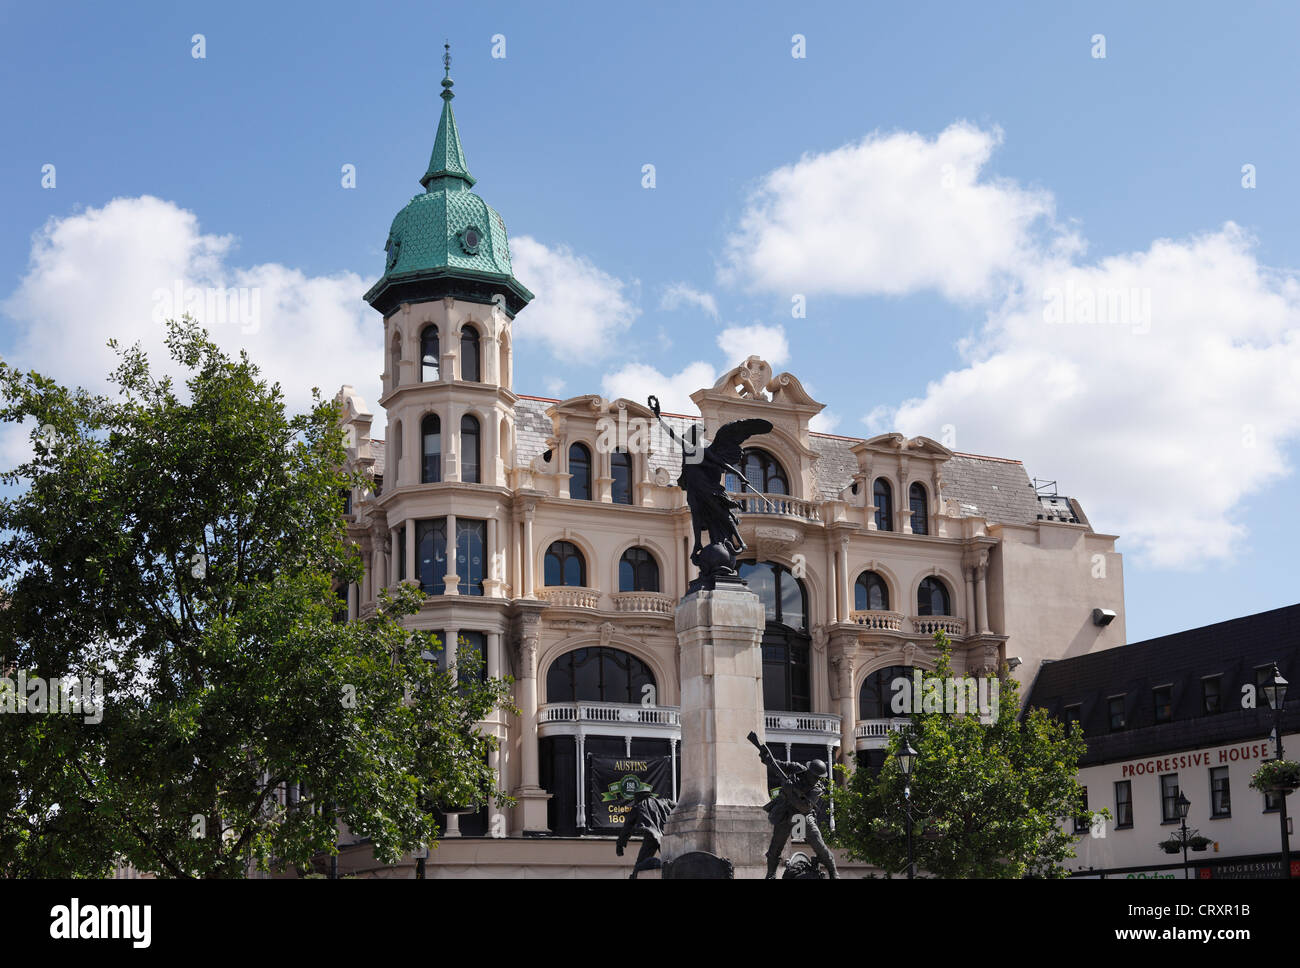 United Kingdom, Northern Ireland, County Derry, View of Austins department store Stock Photo